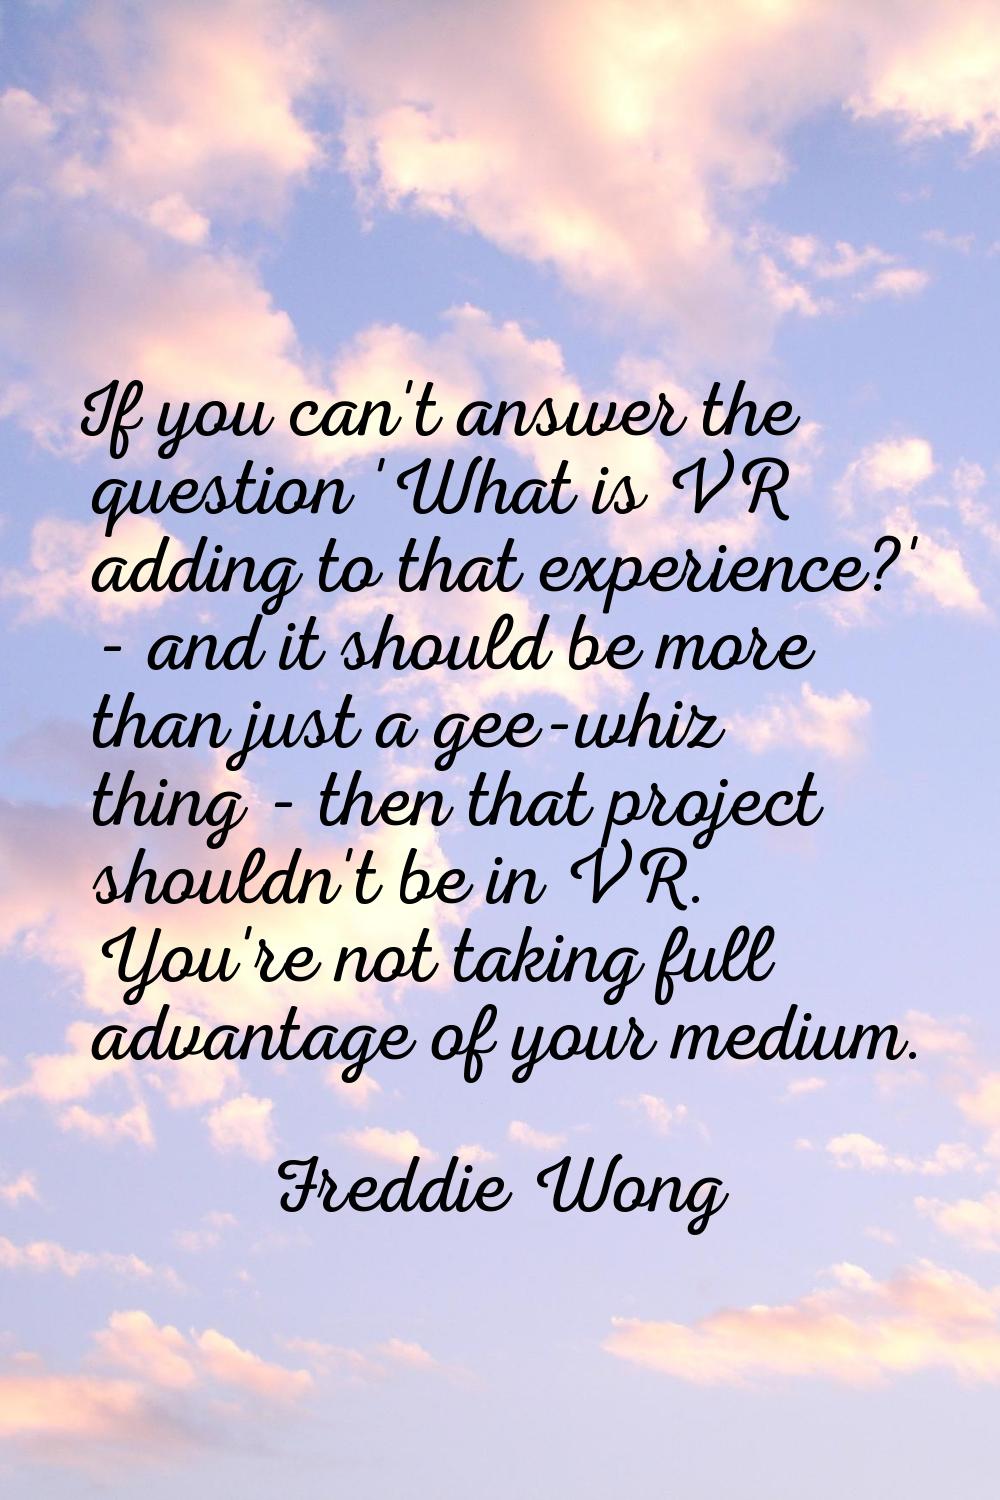 If you can't answer the question 'What is VR adding to that experience?' - and it should be more th